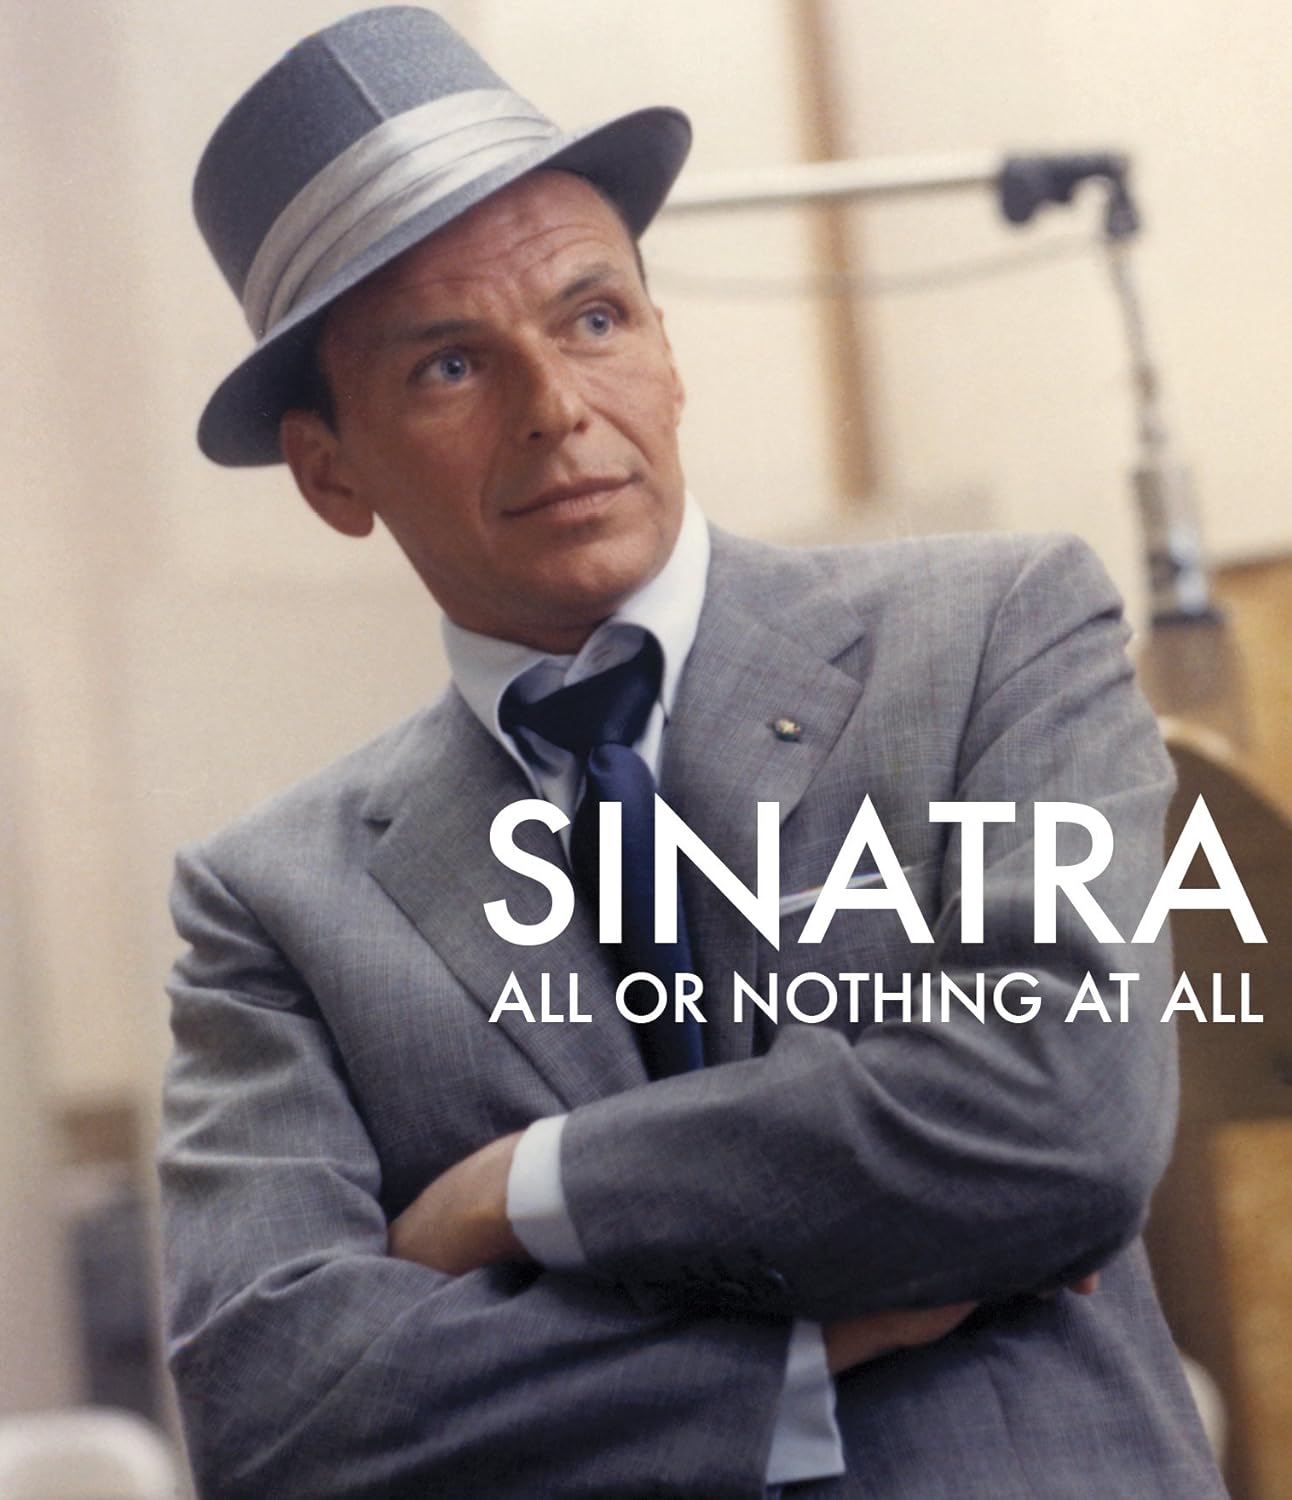 Frank Sinatra: All or Nothing At All